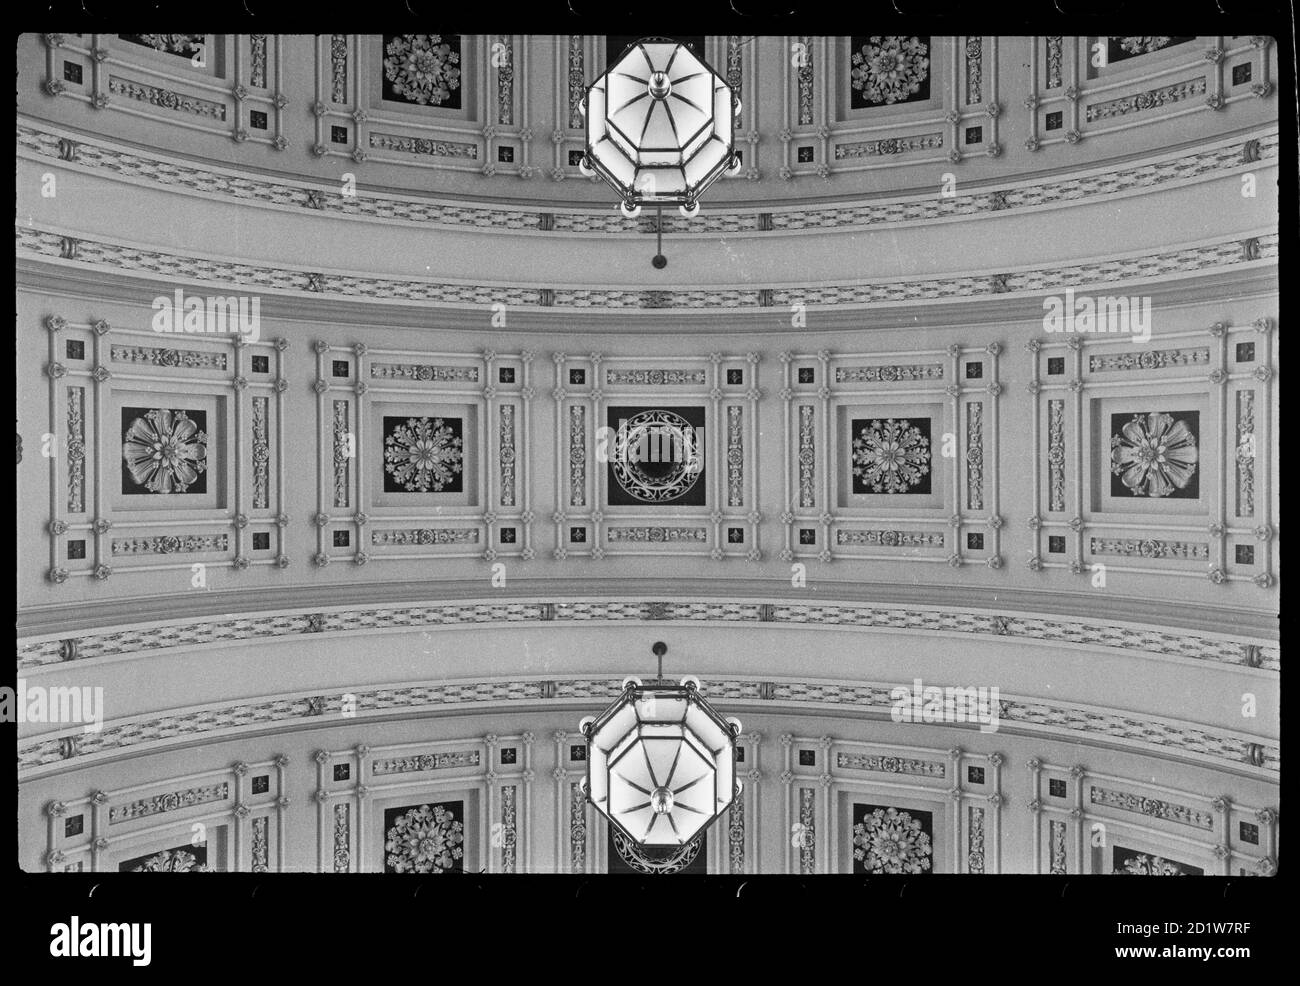 Ceiling detail of Victoria hall in the Town Hall, Victoria Square, Leeds, UK. Stock Photo